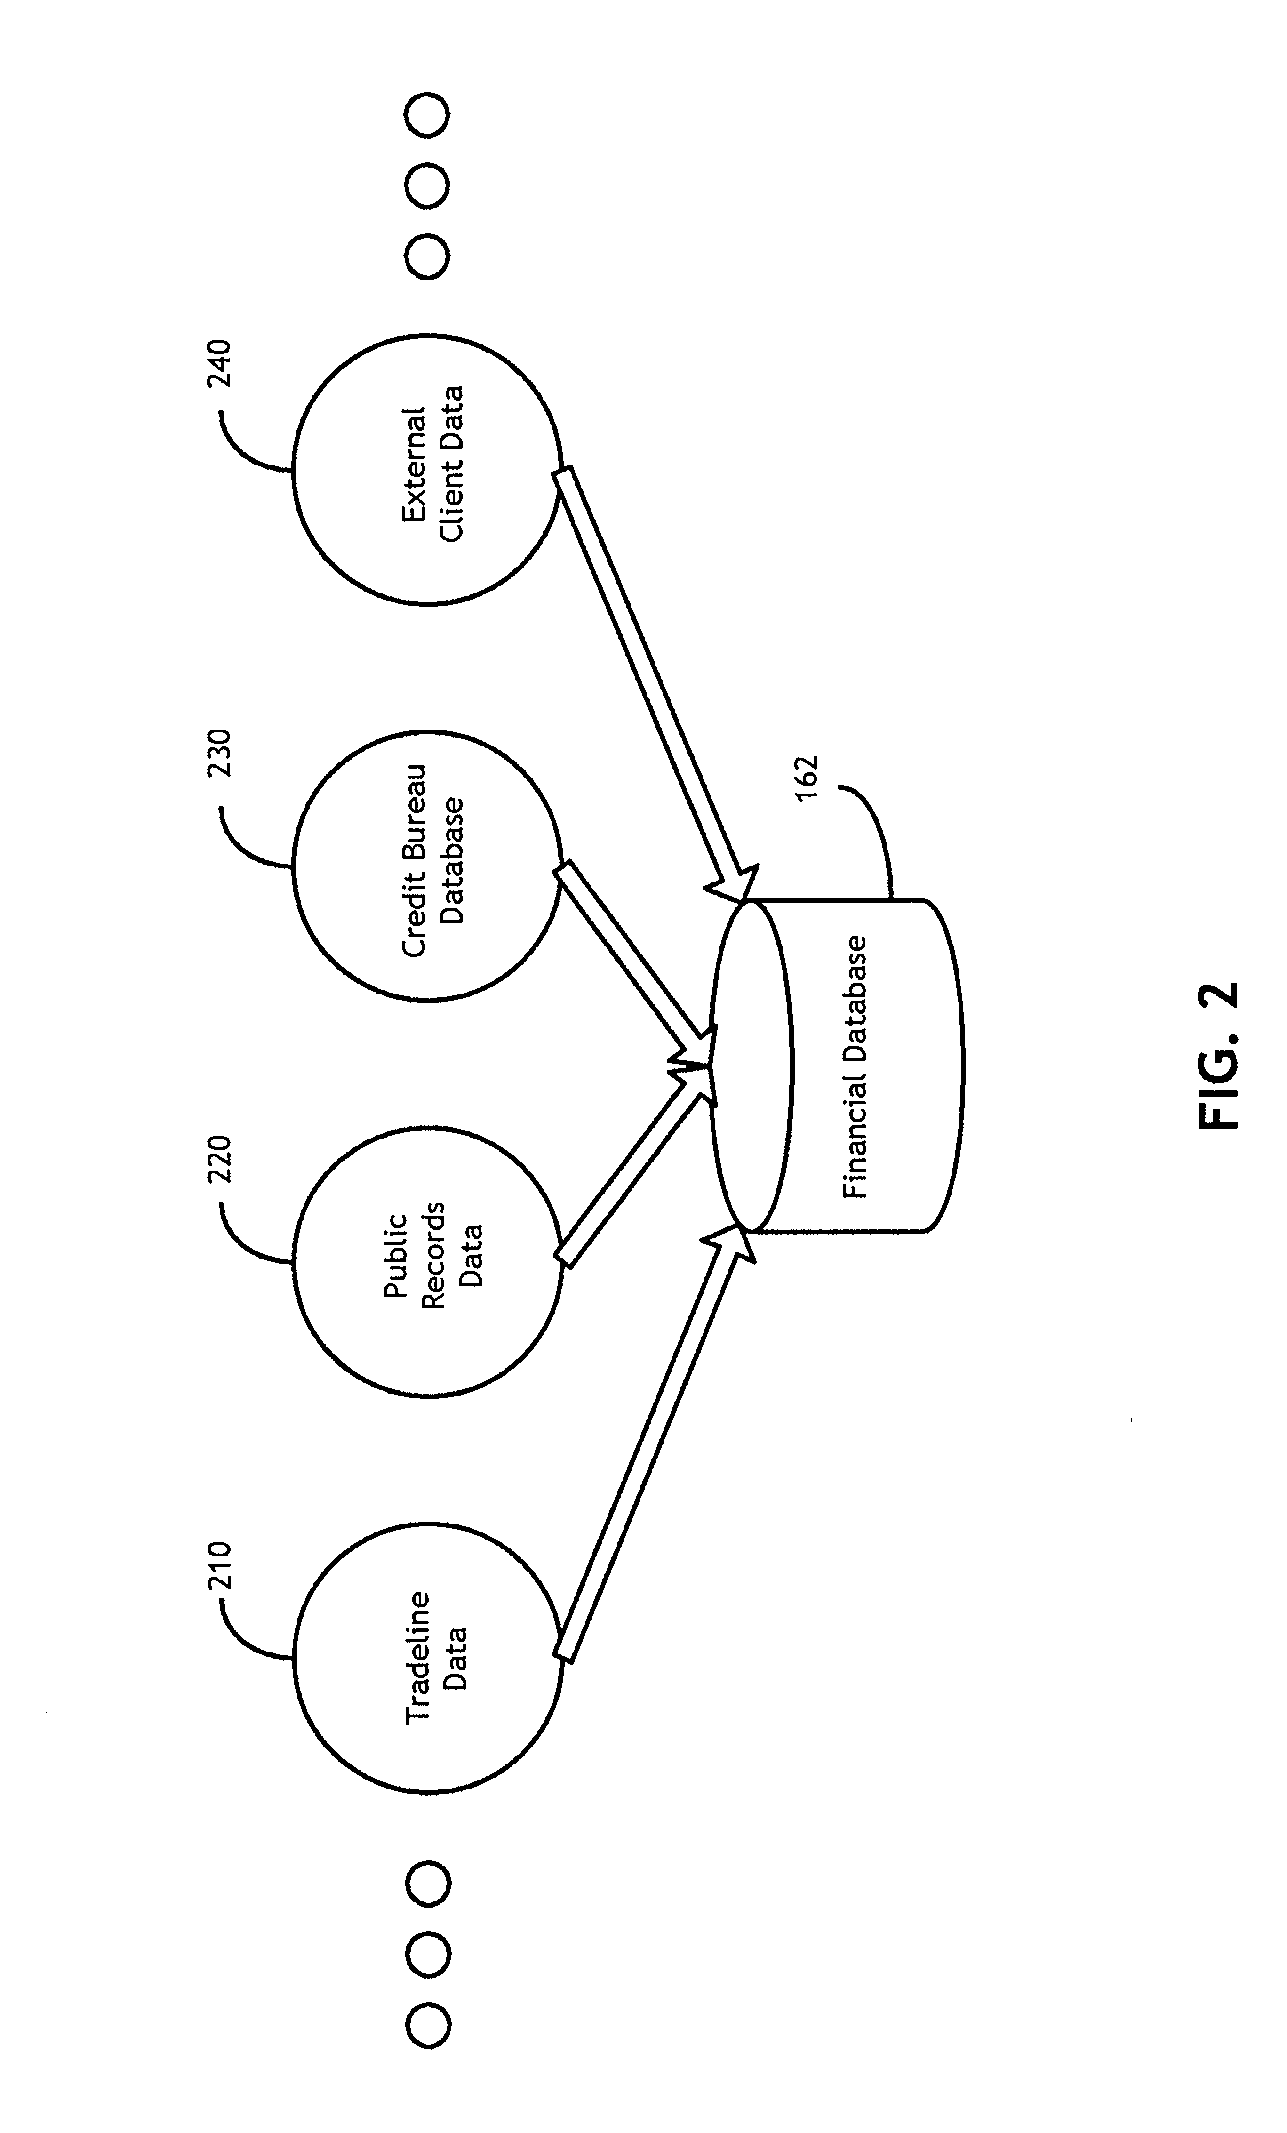 Systems and methods for monitoring financial activities of consumers